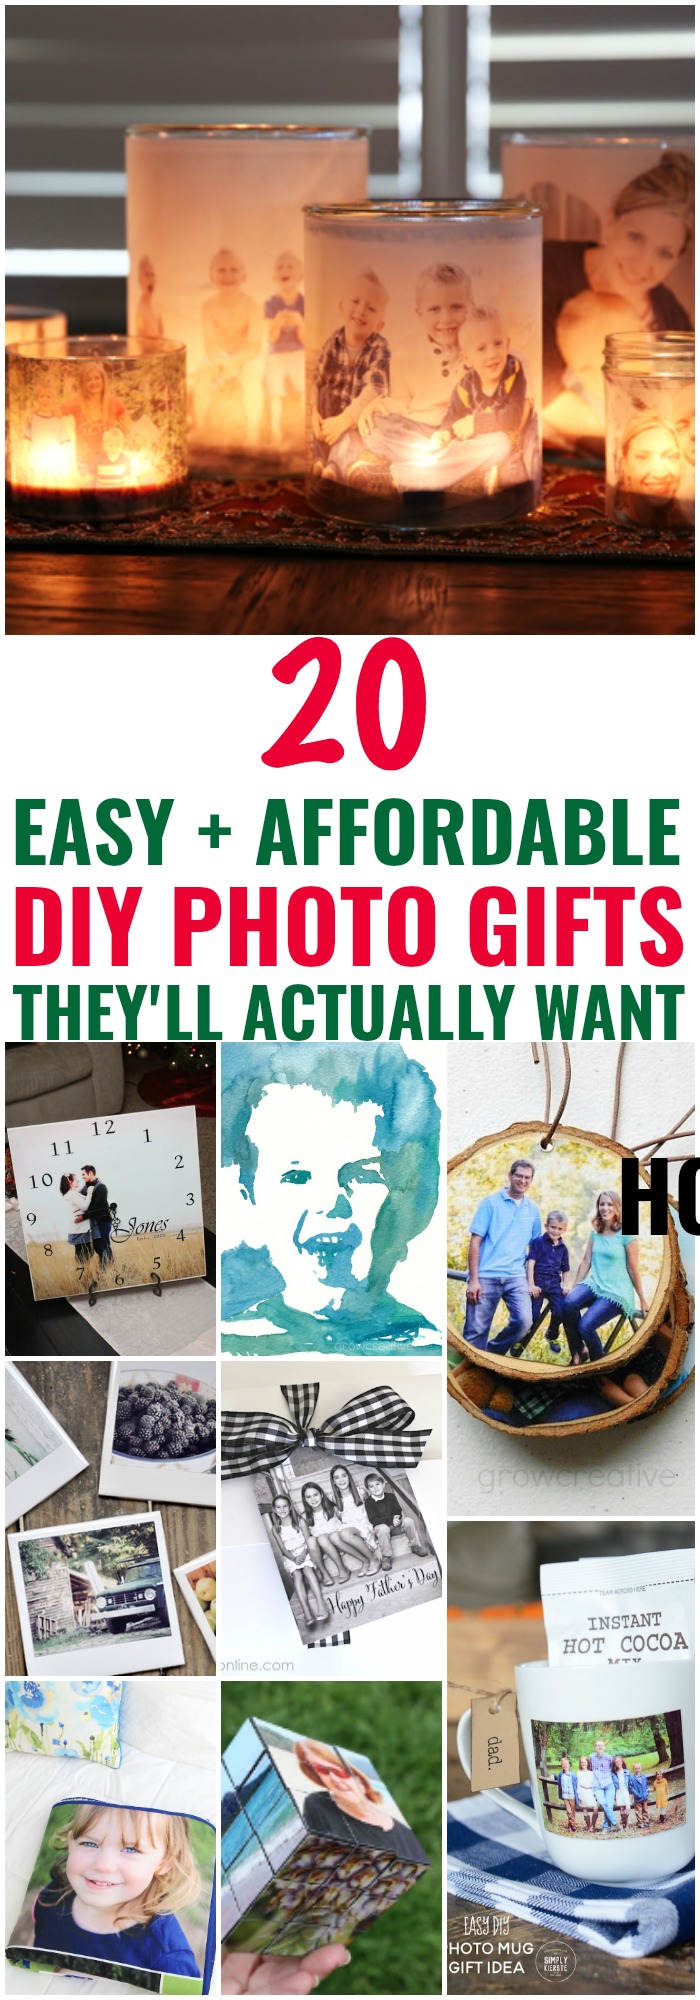 DIY Photo Gifts They'll Love